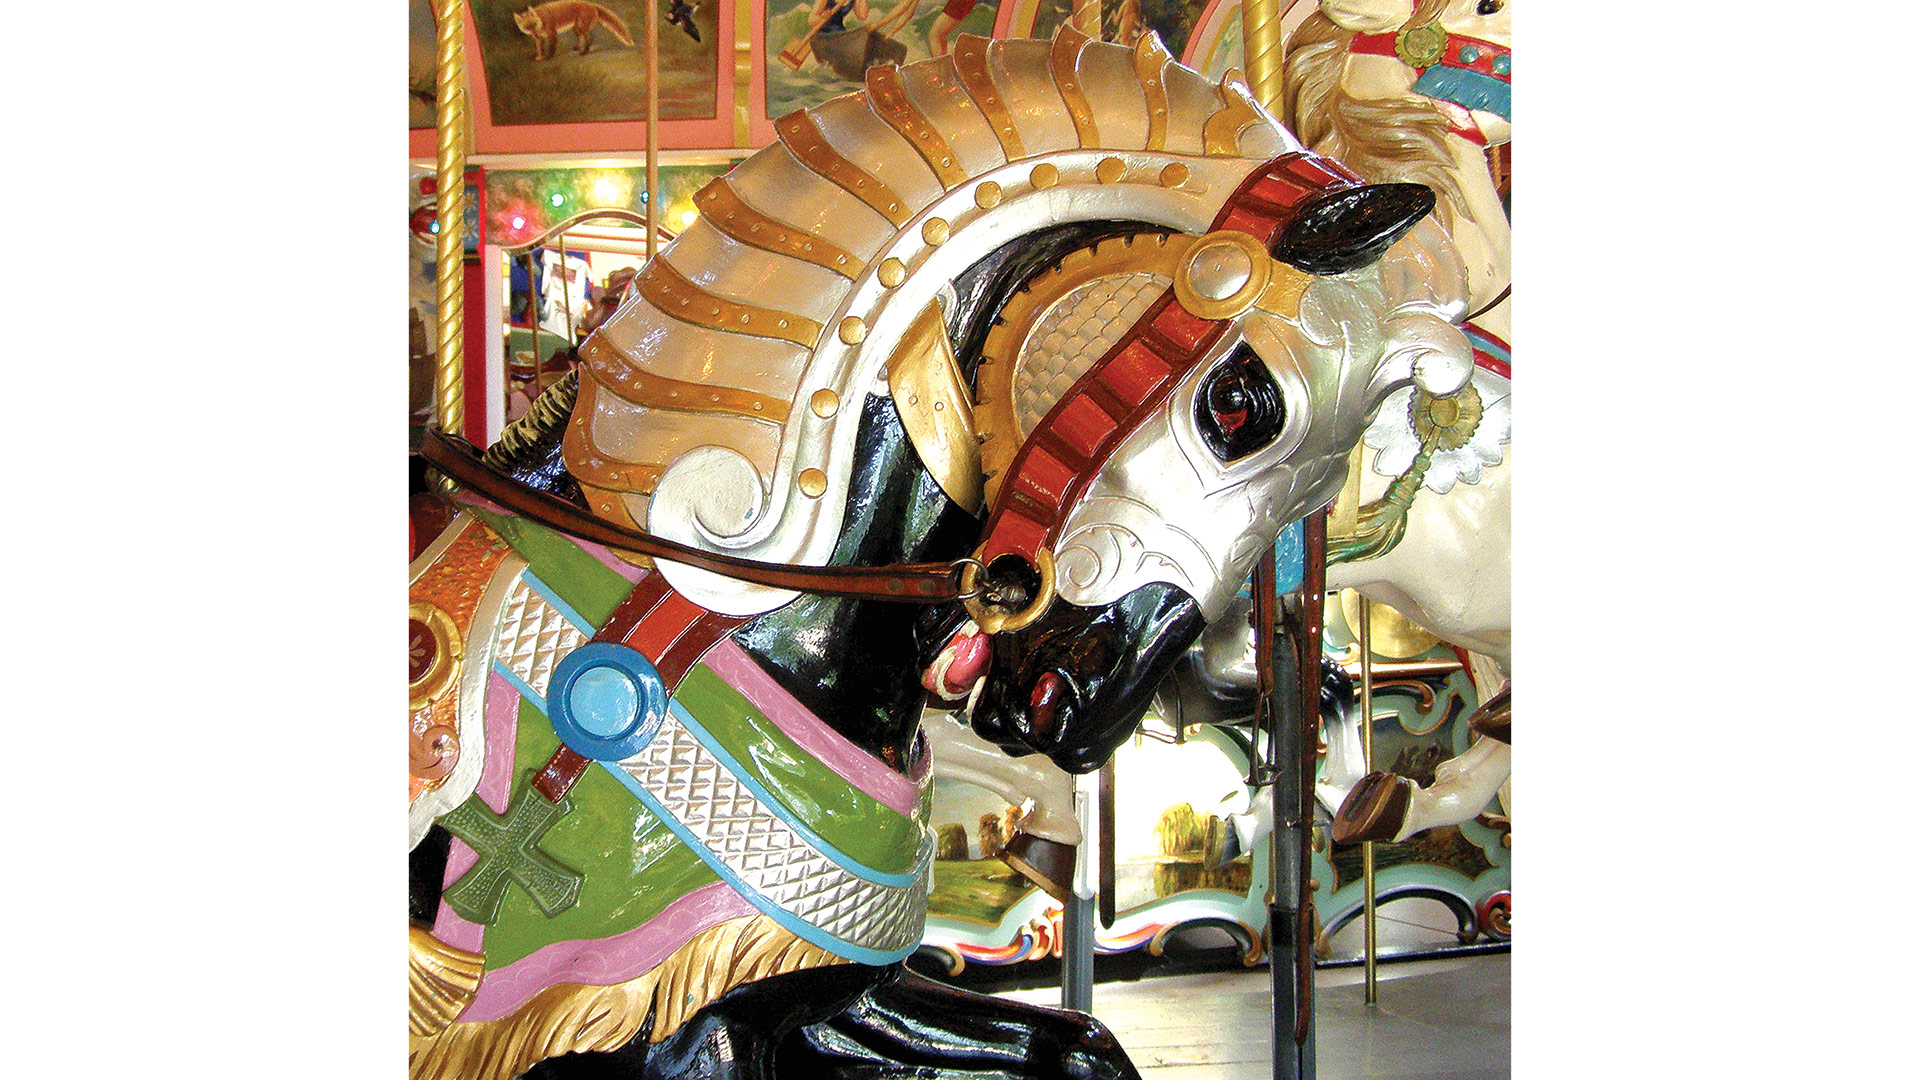 One of the horses from the carousel